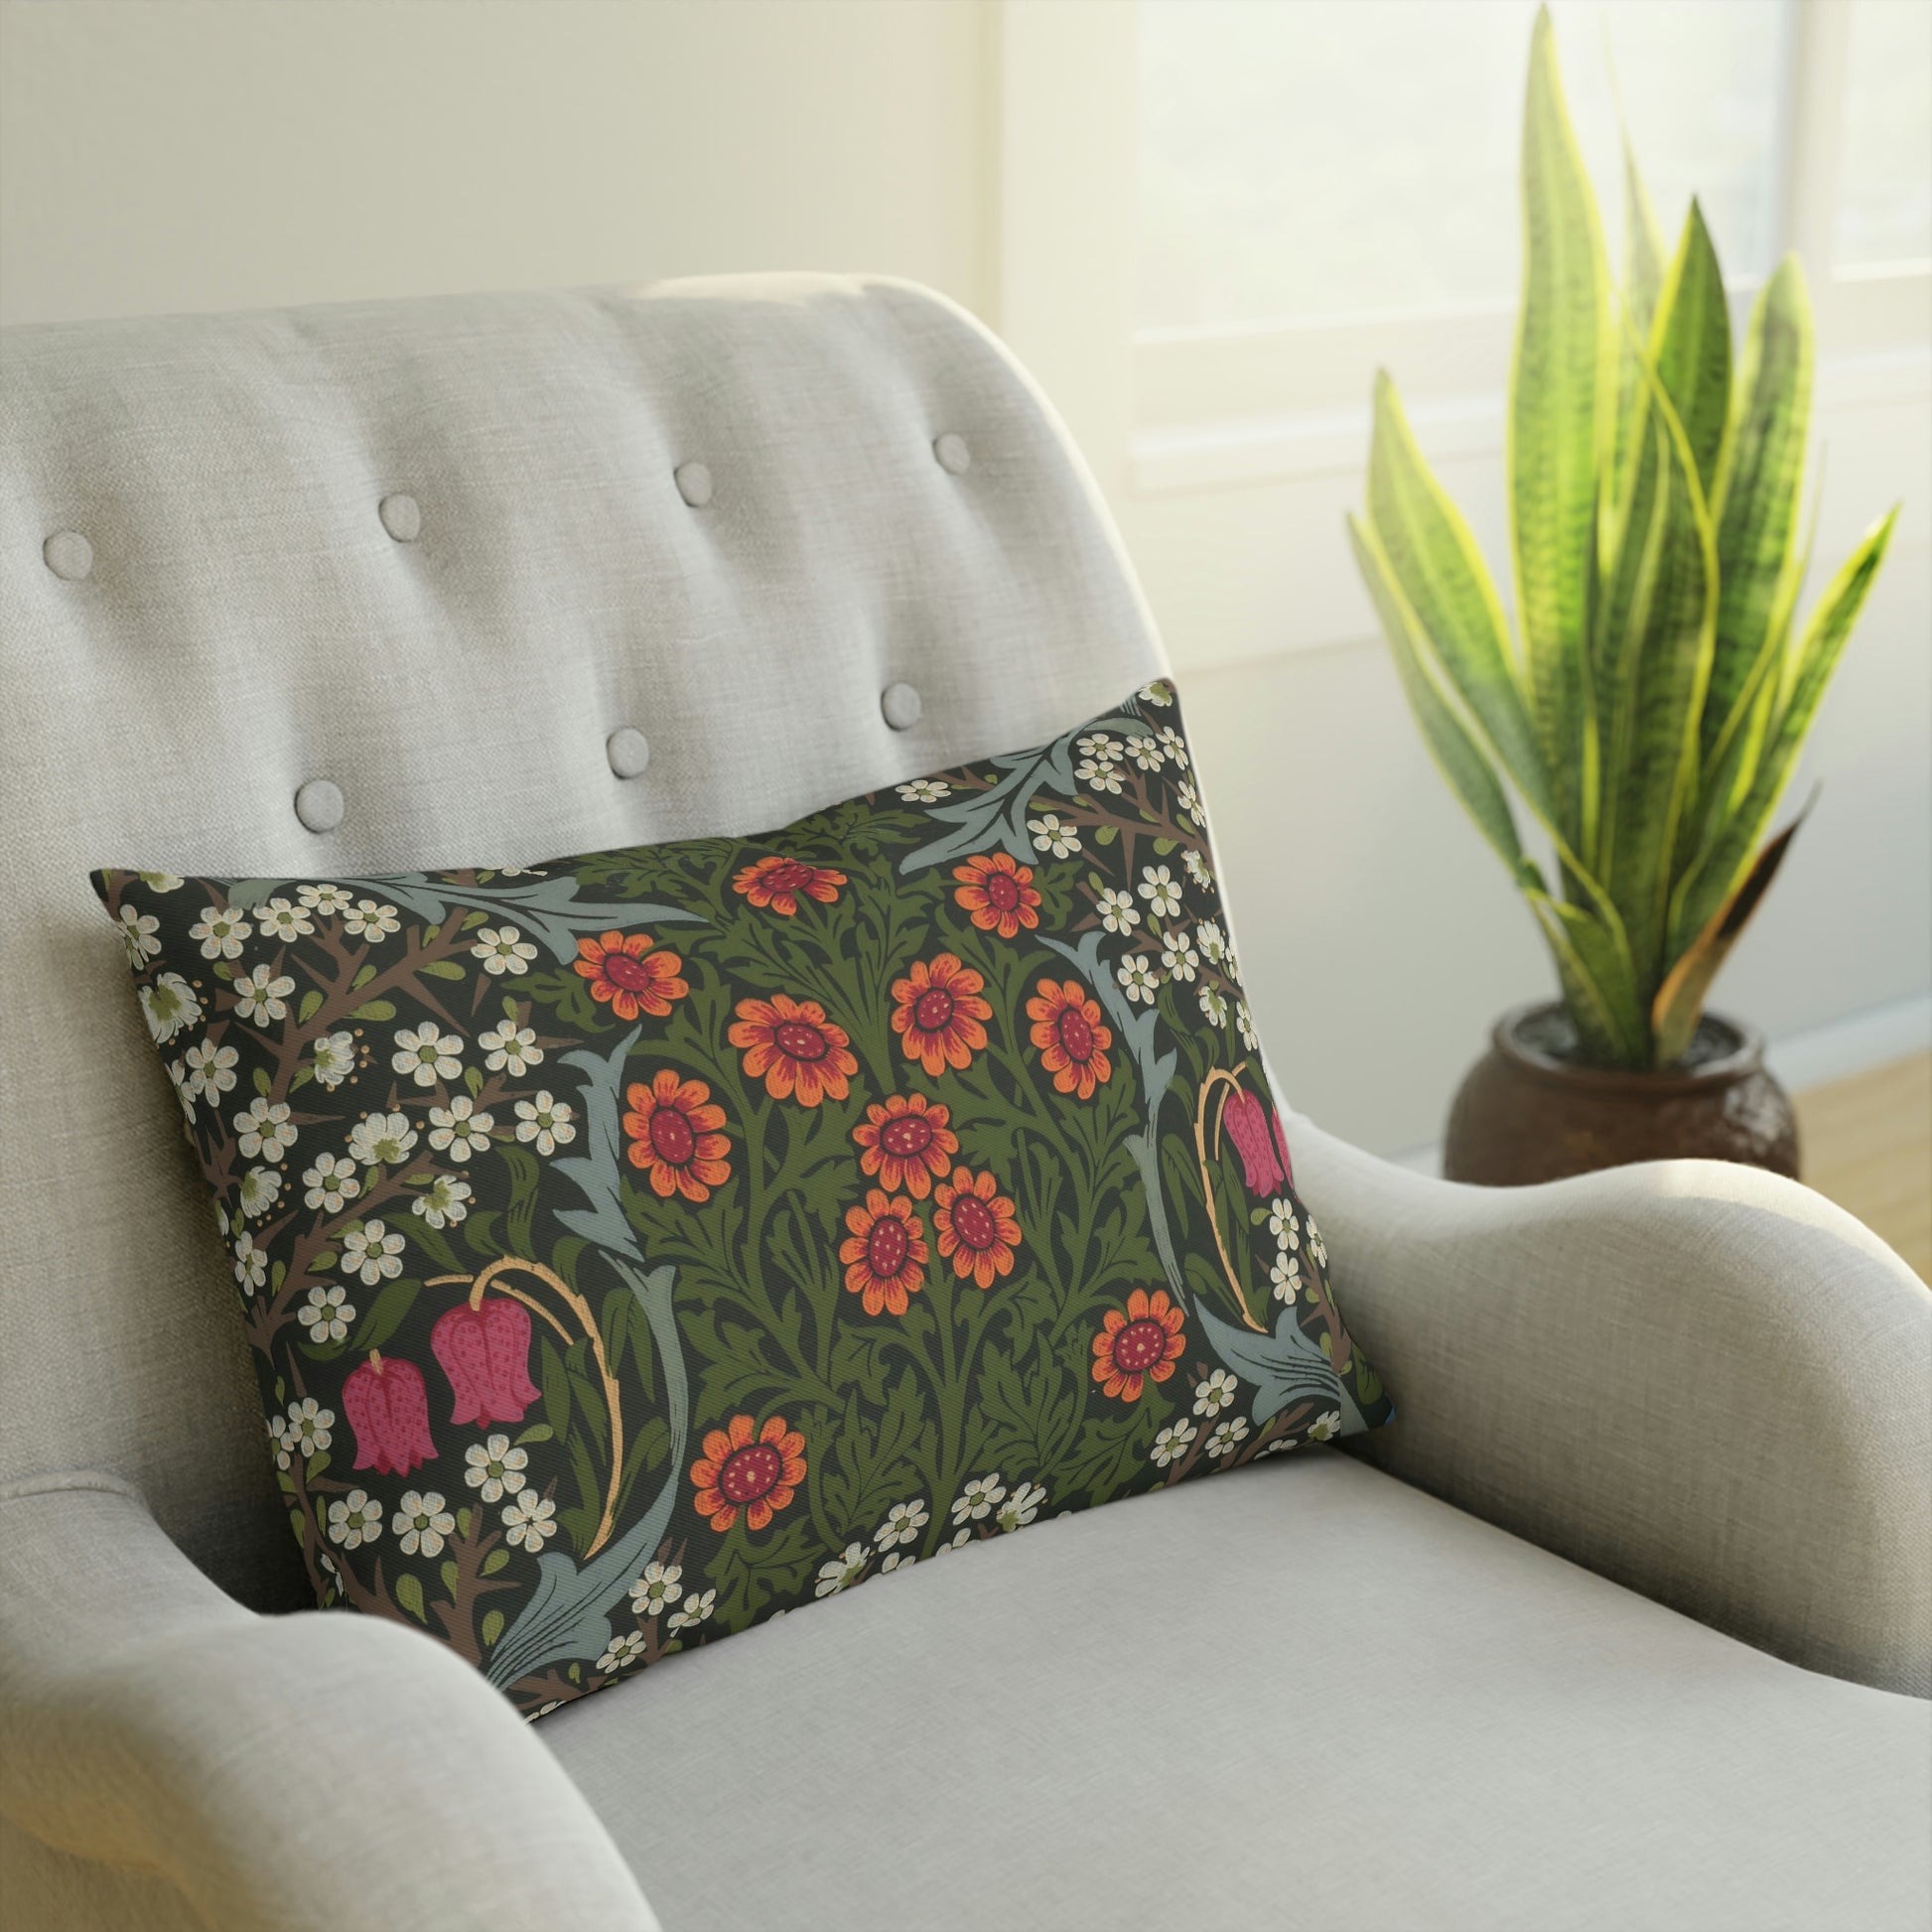 william-morris-cushion-and-cushion-cover-blackthorn-collection-15